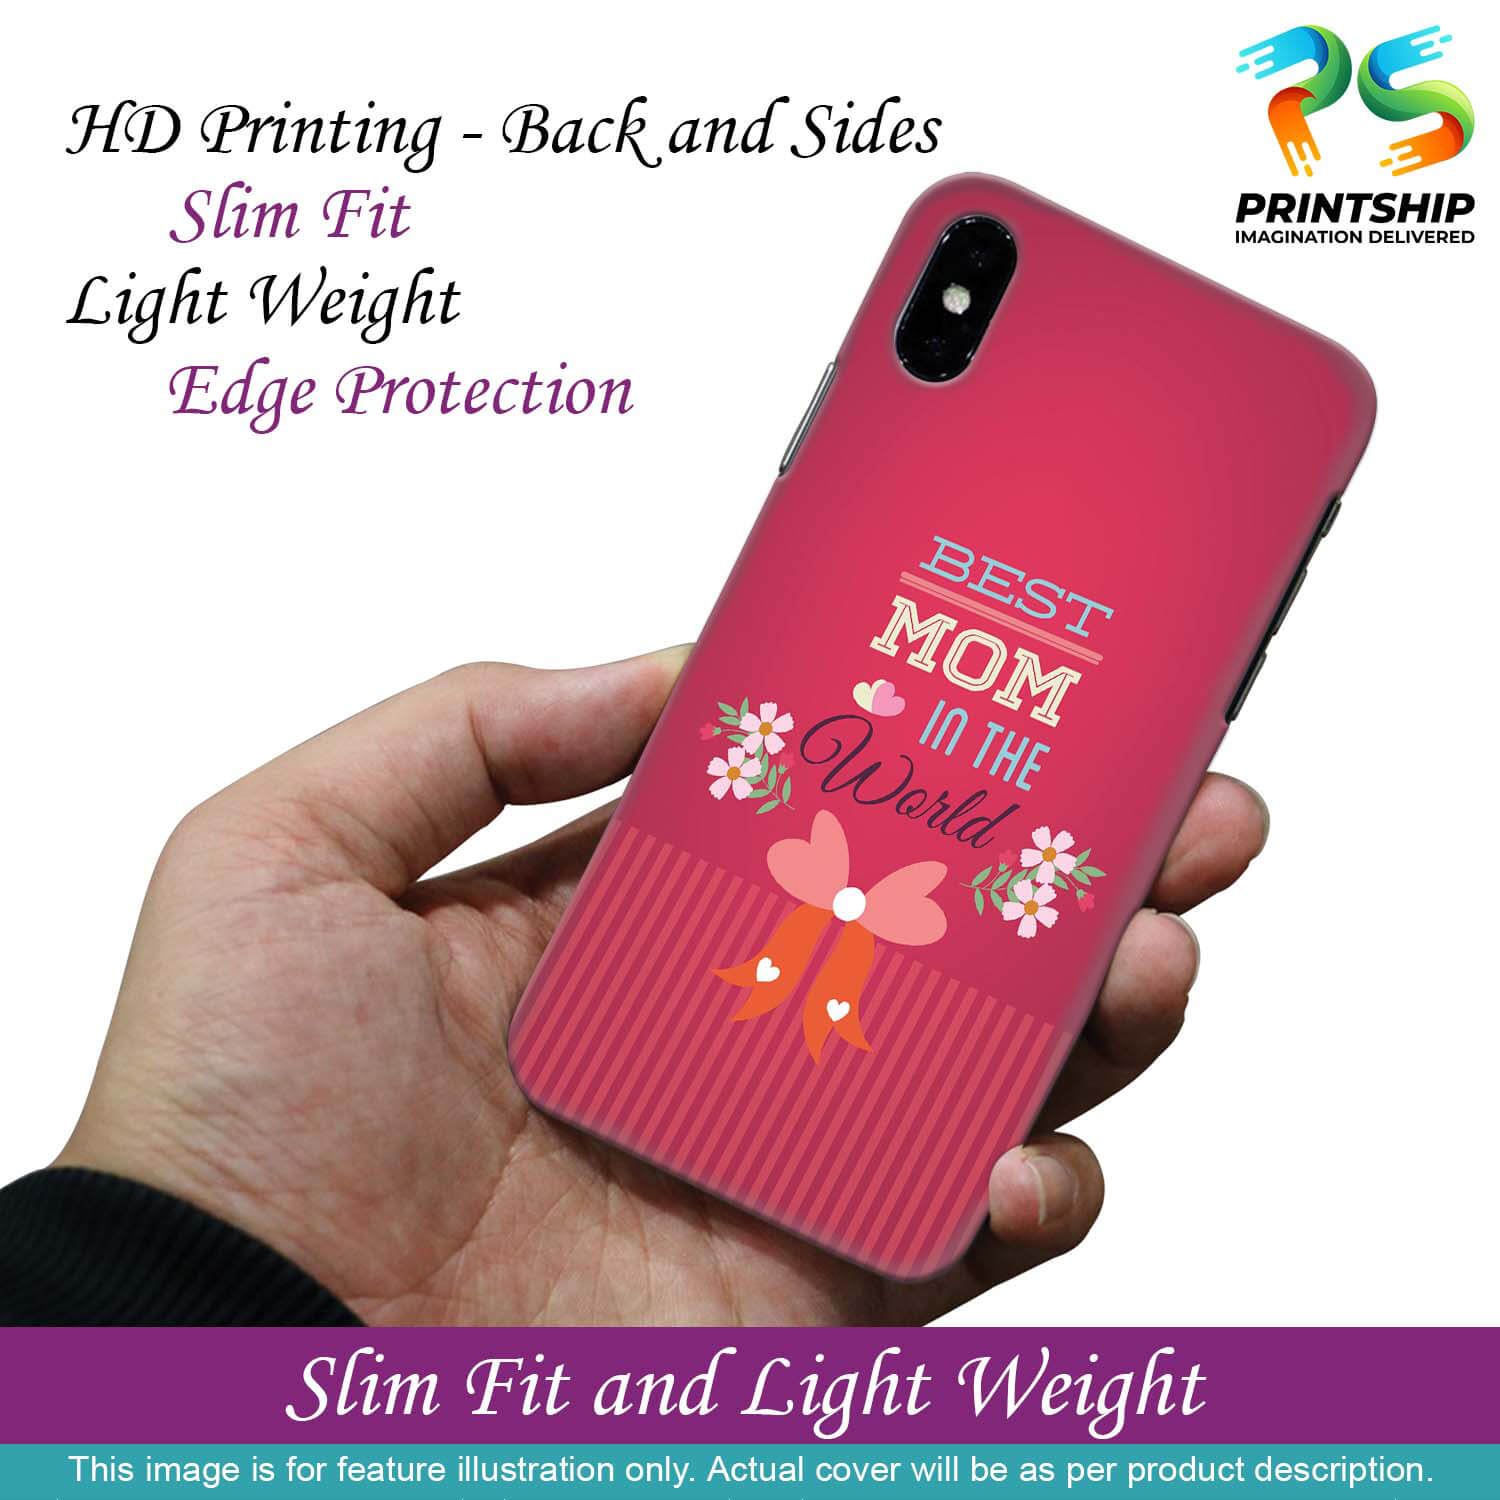 G0357-Best Mom in the World Back Cover for Realme Narzo 30 Pro